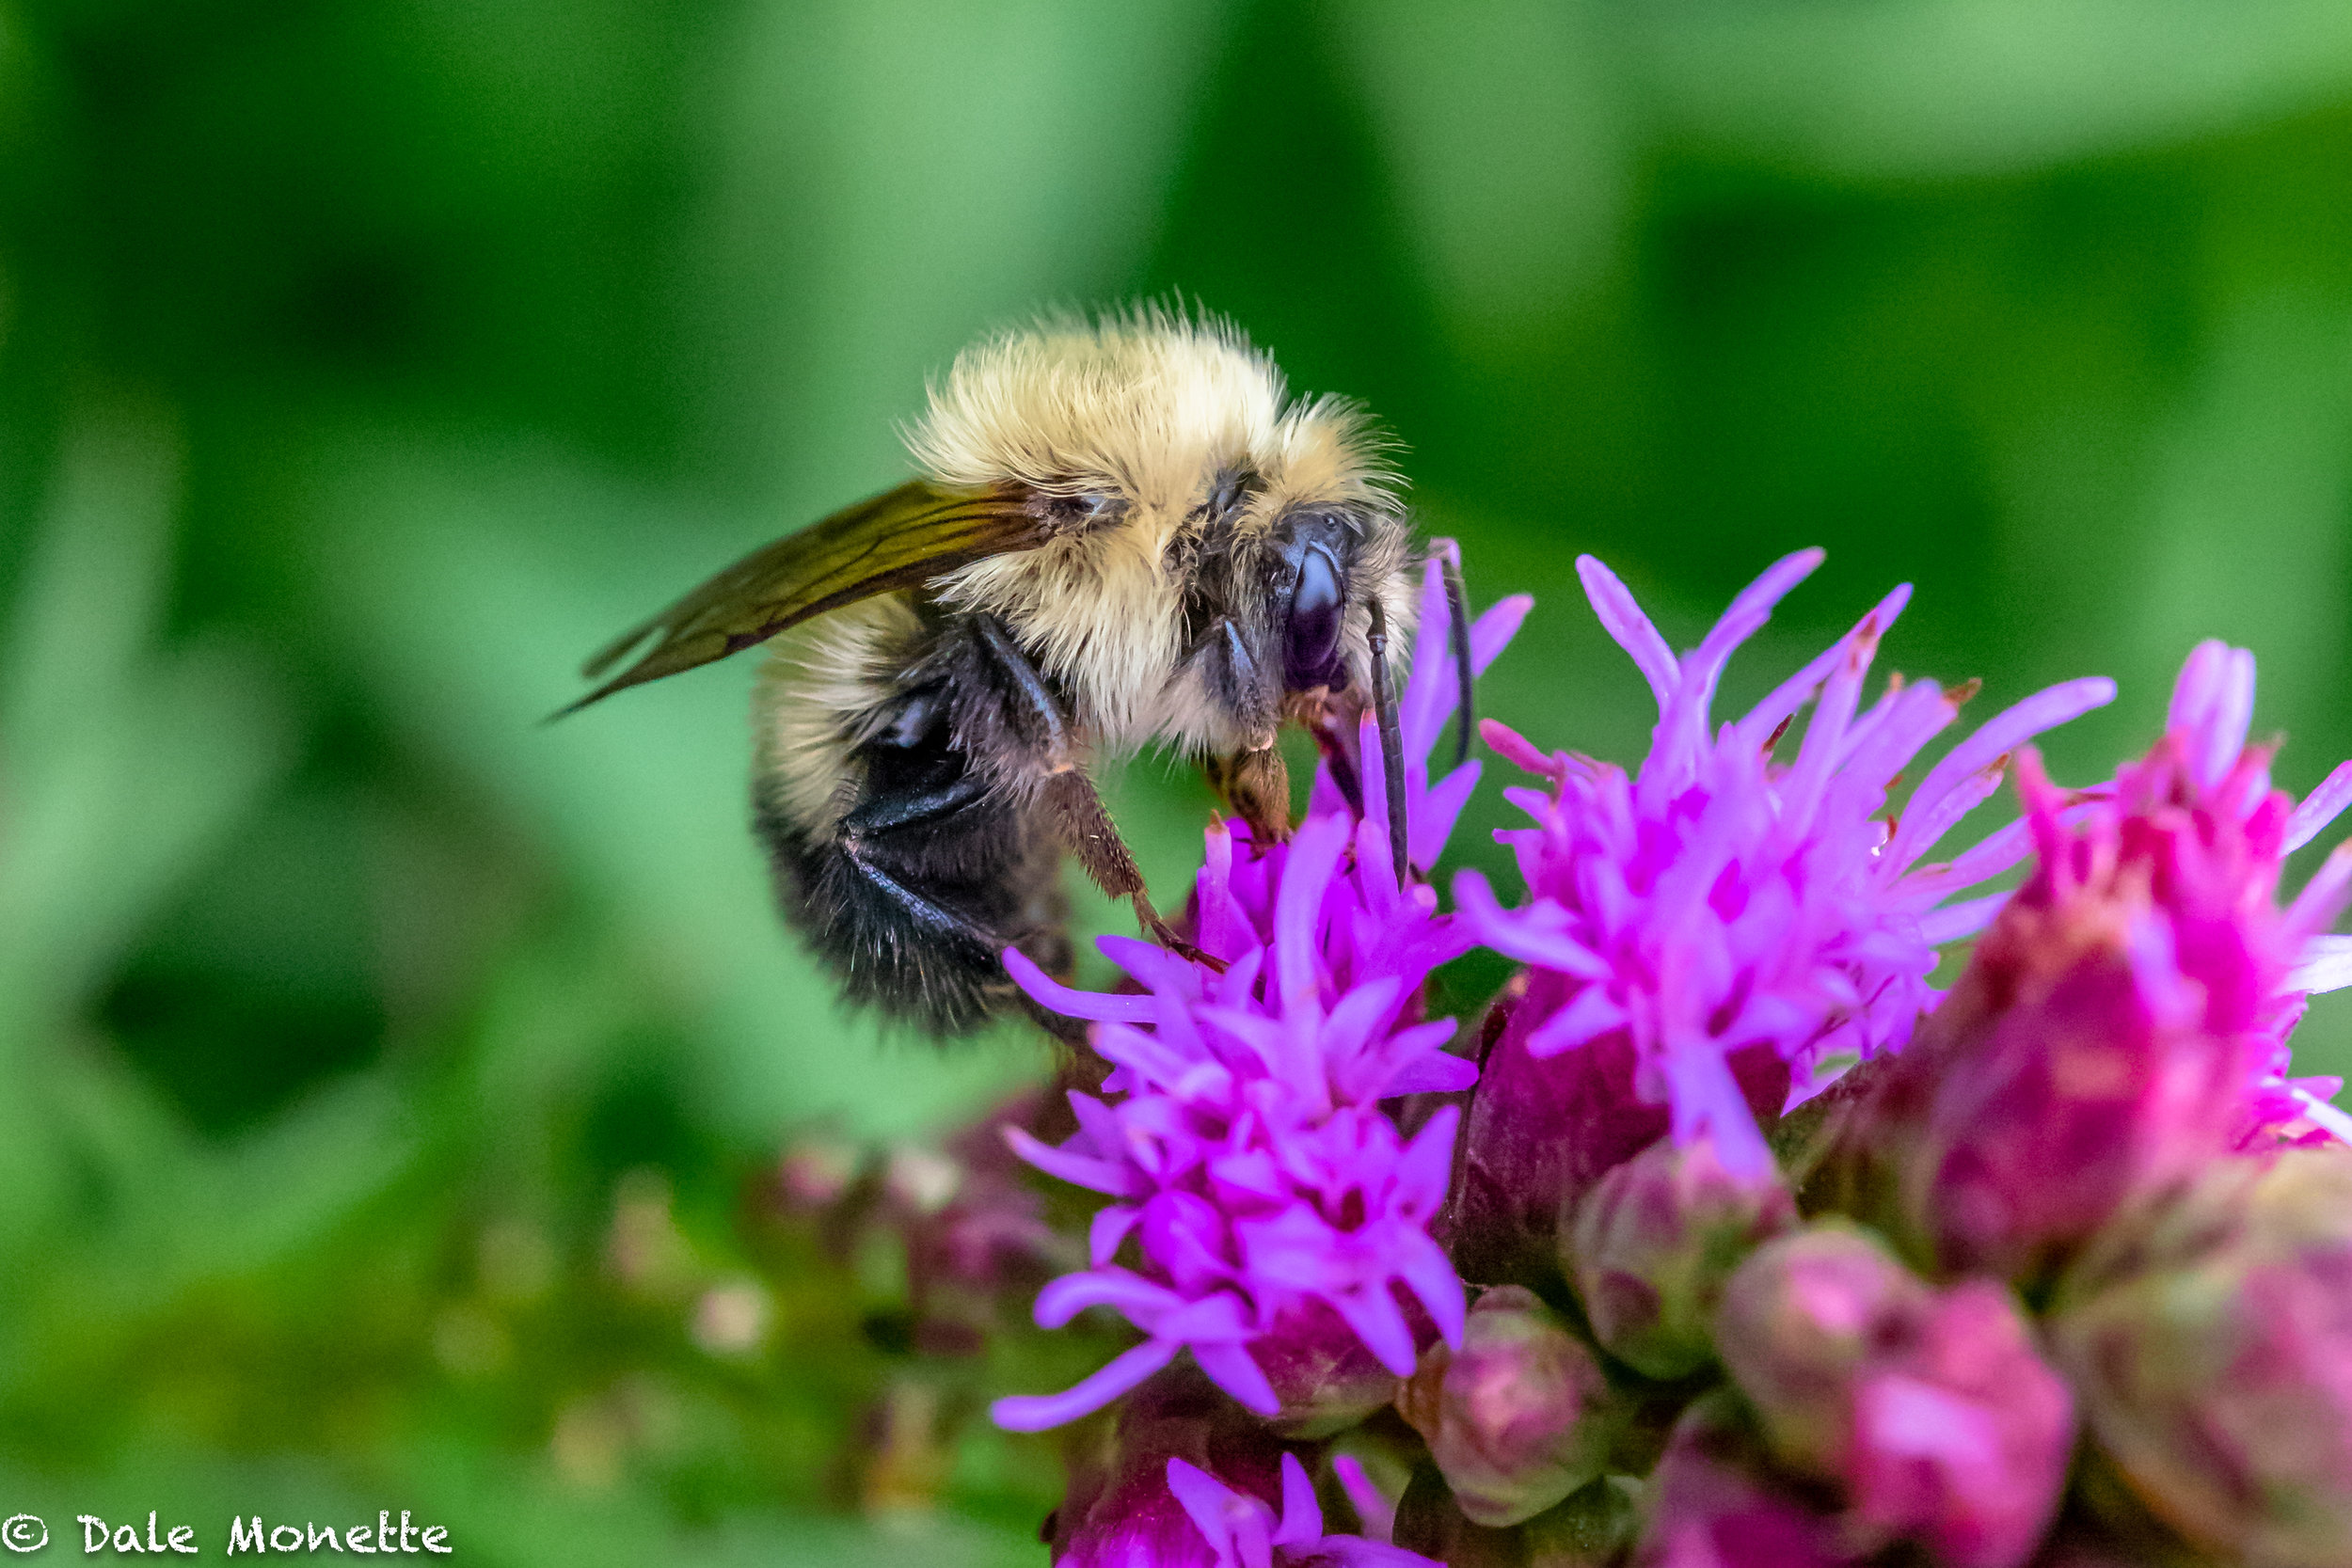   This bumble bee was taking his time with this flower so I tried out my new Nikon 60mm micro lens.. what do ya think?    